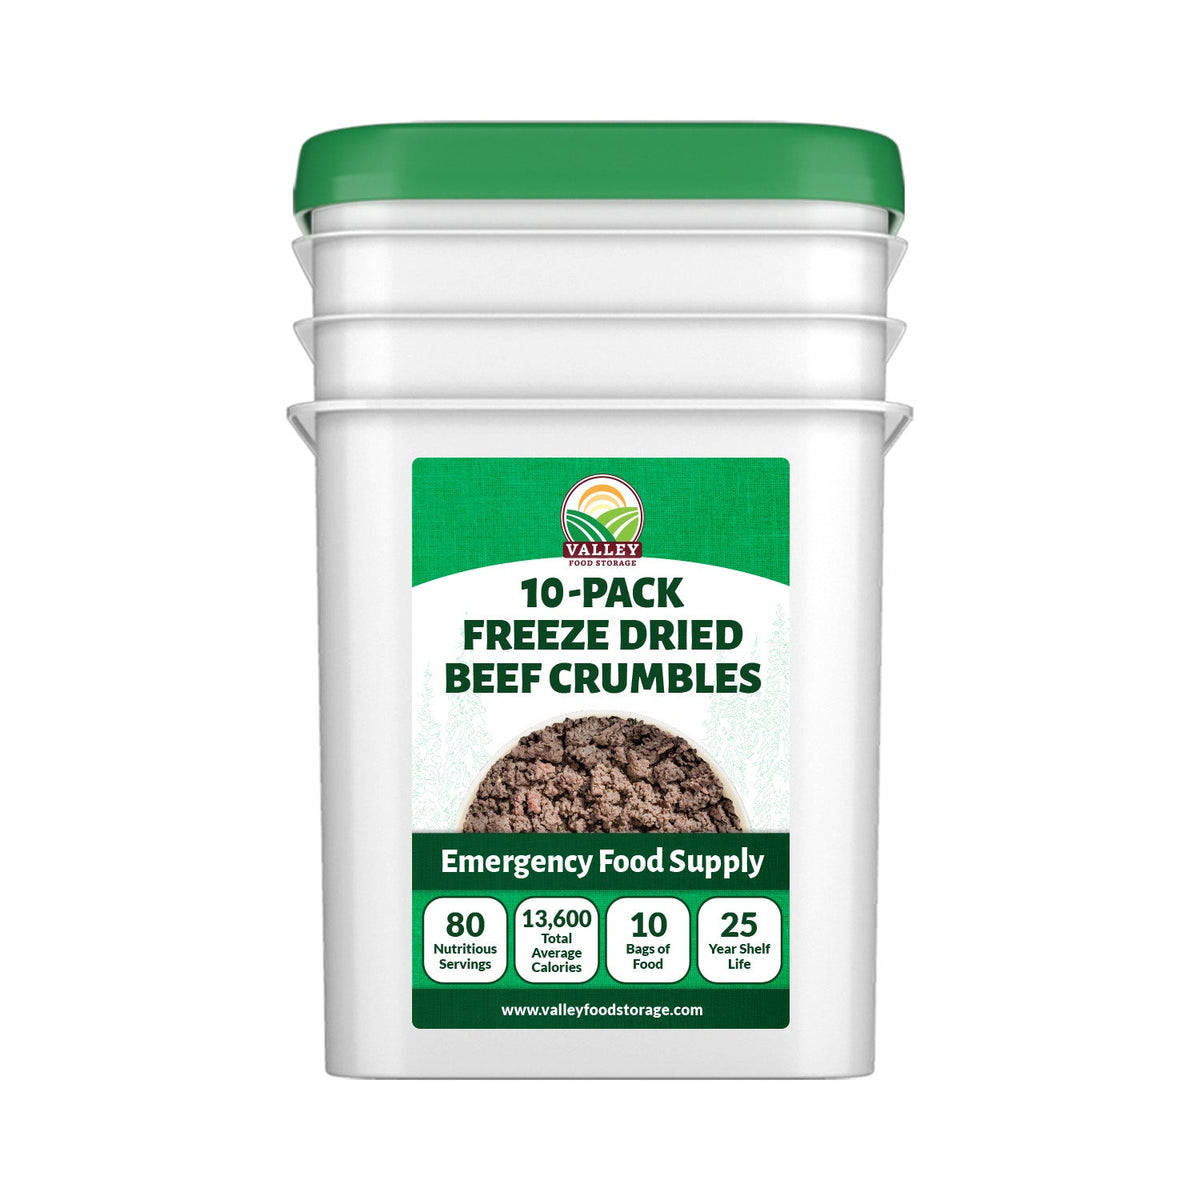 Freeze Dried Beef Crumbles | 10 Bags + Bucket Bag From Valley Food Storage